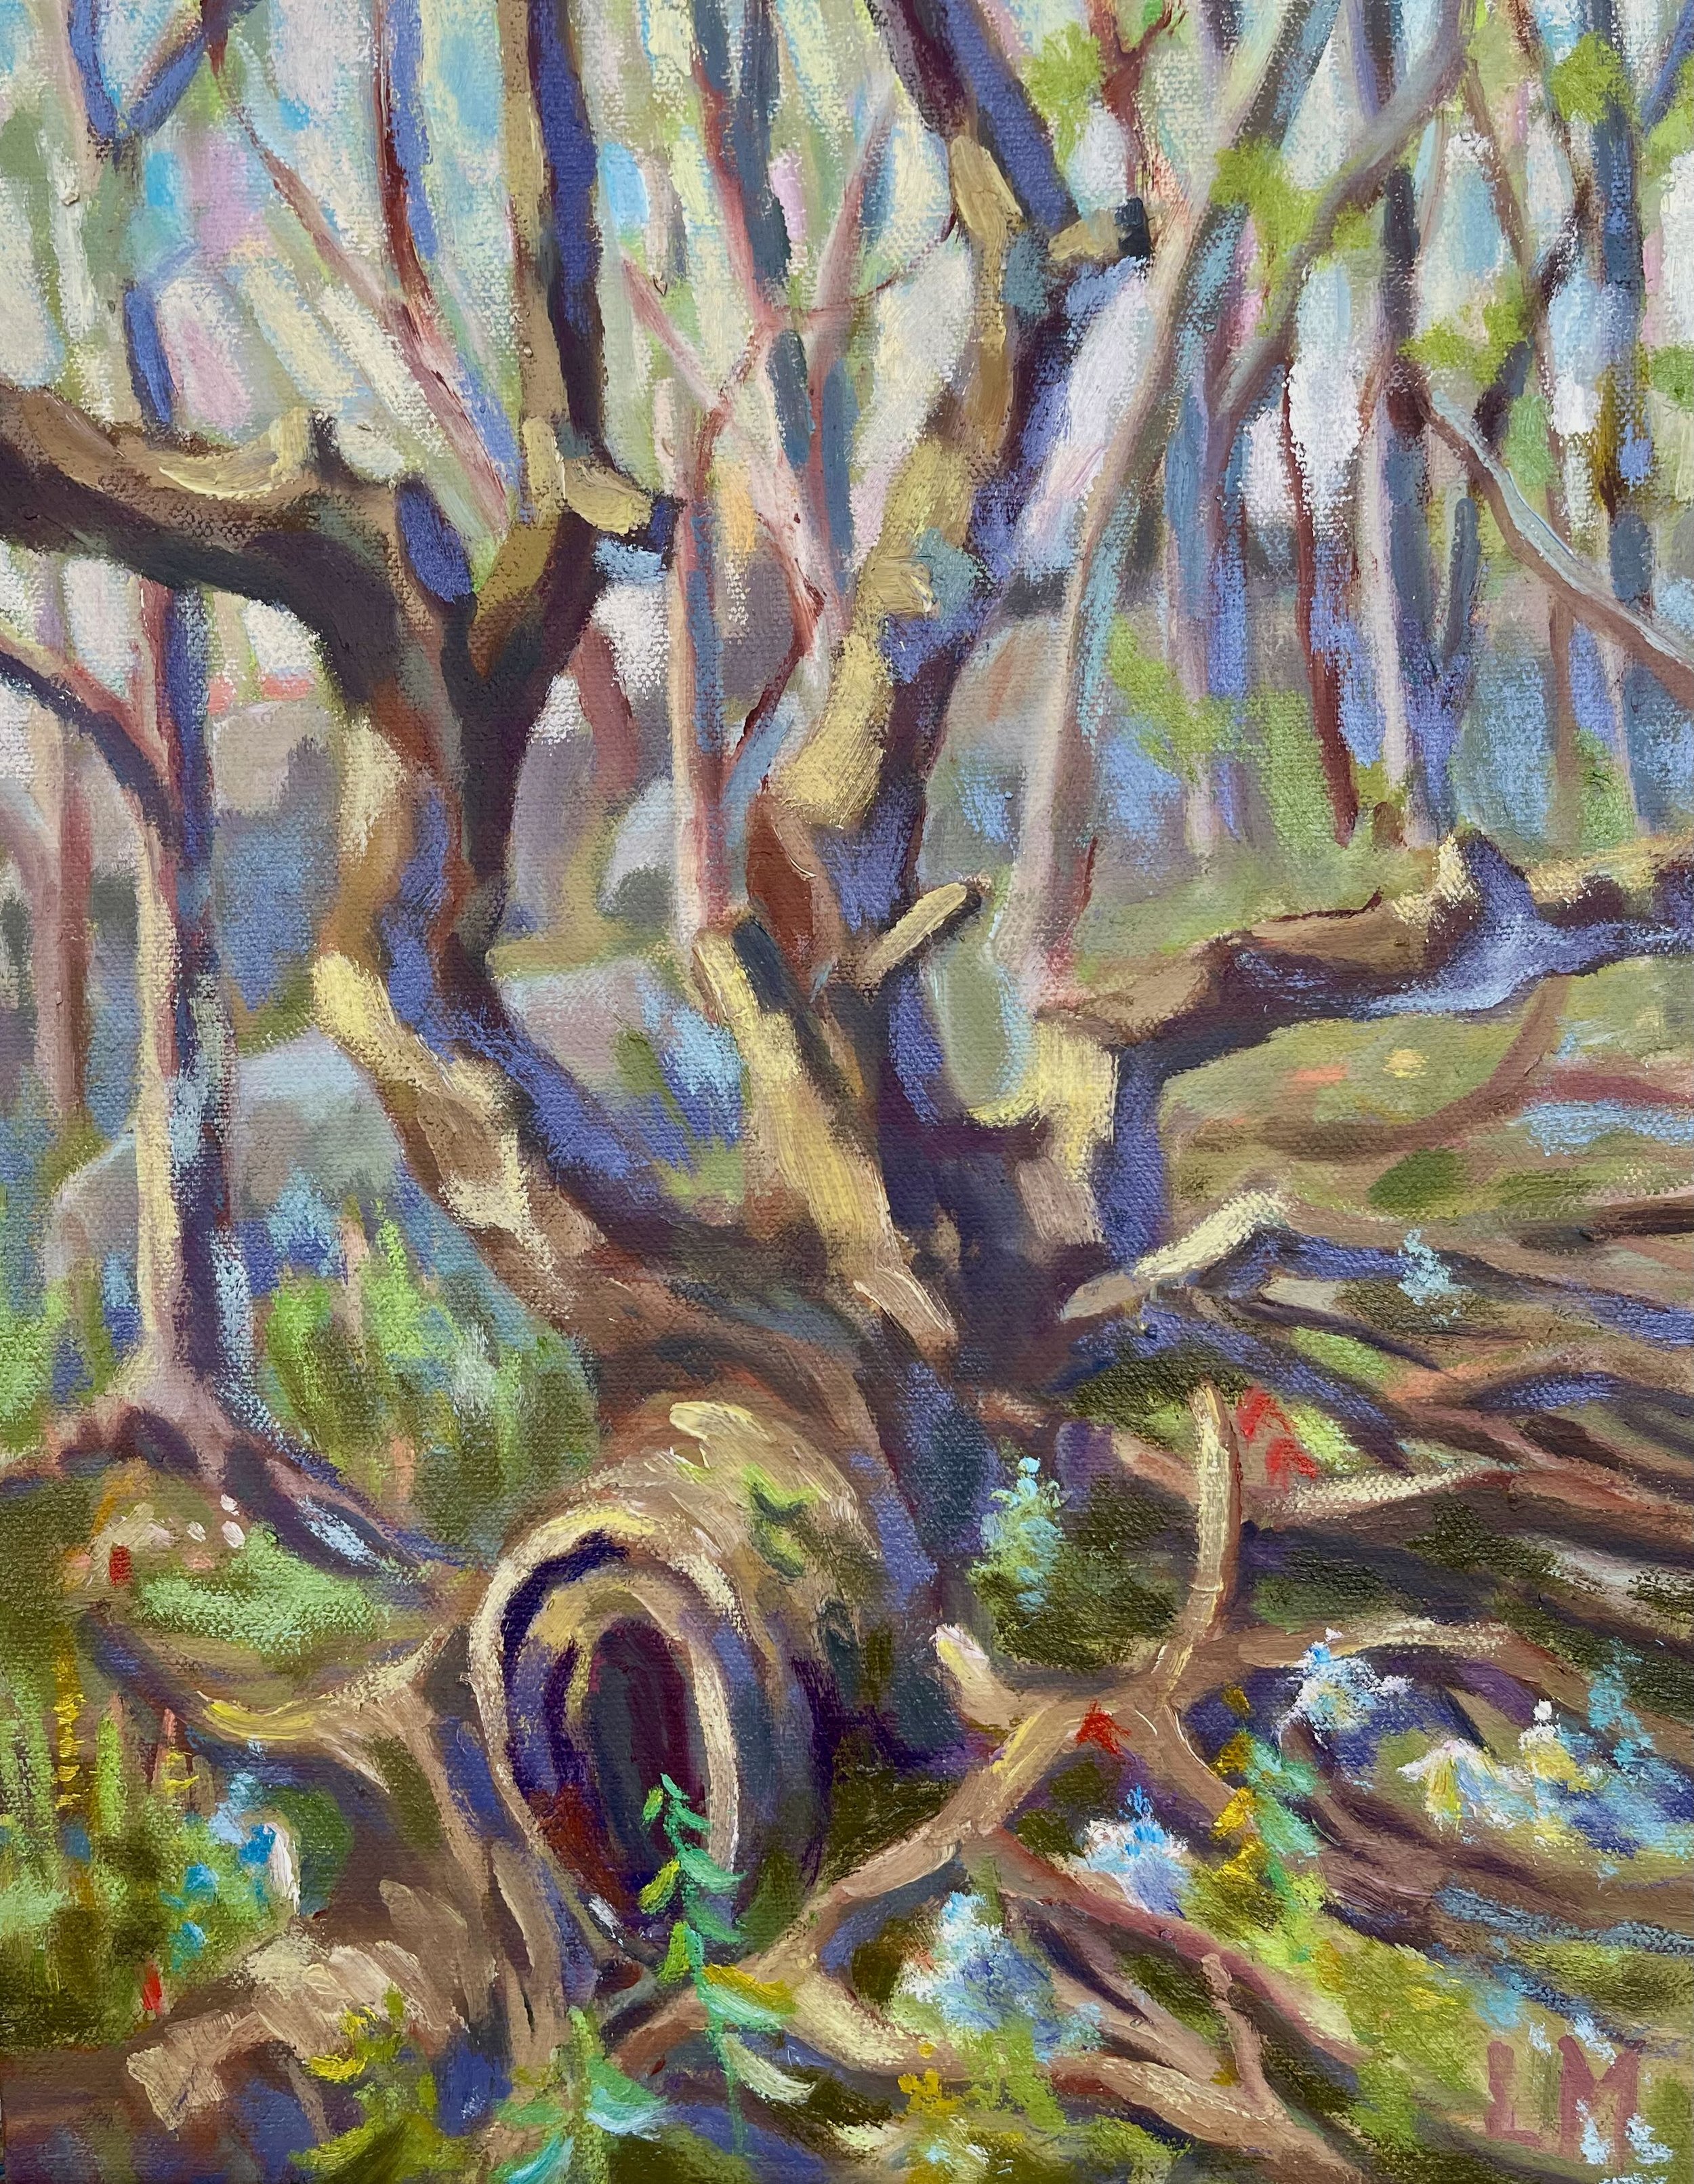 The Mother Tree, oils, 11x14